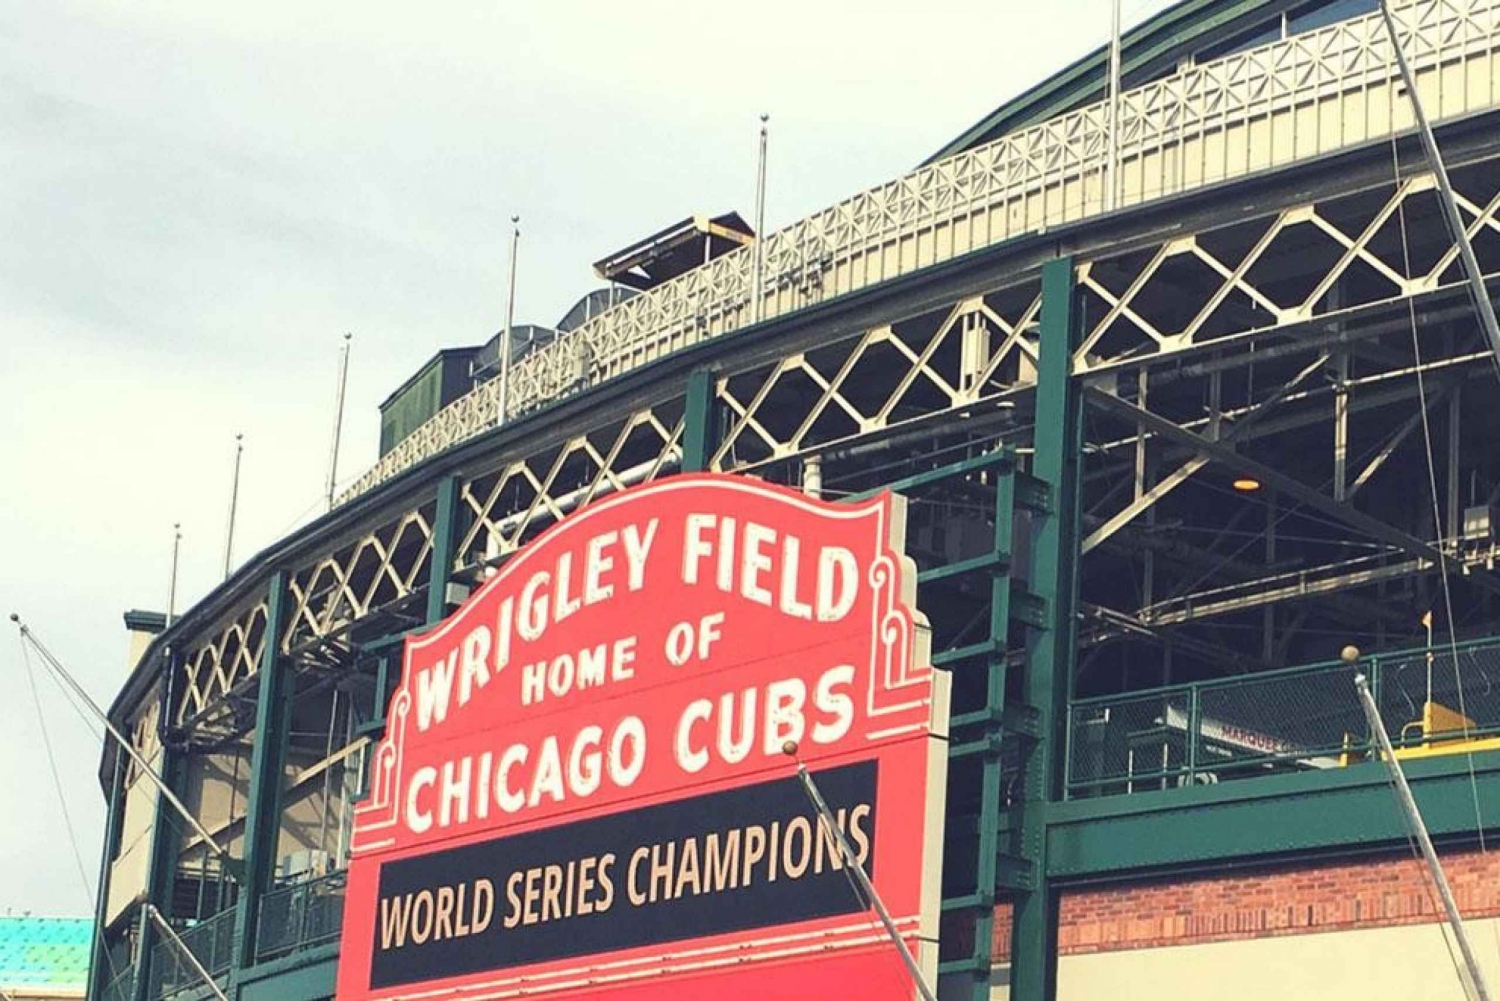 Chicago: The Curious Curse of the Chicago Cubs Audio Tour